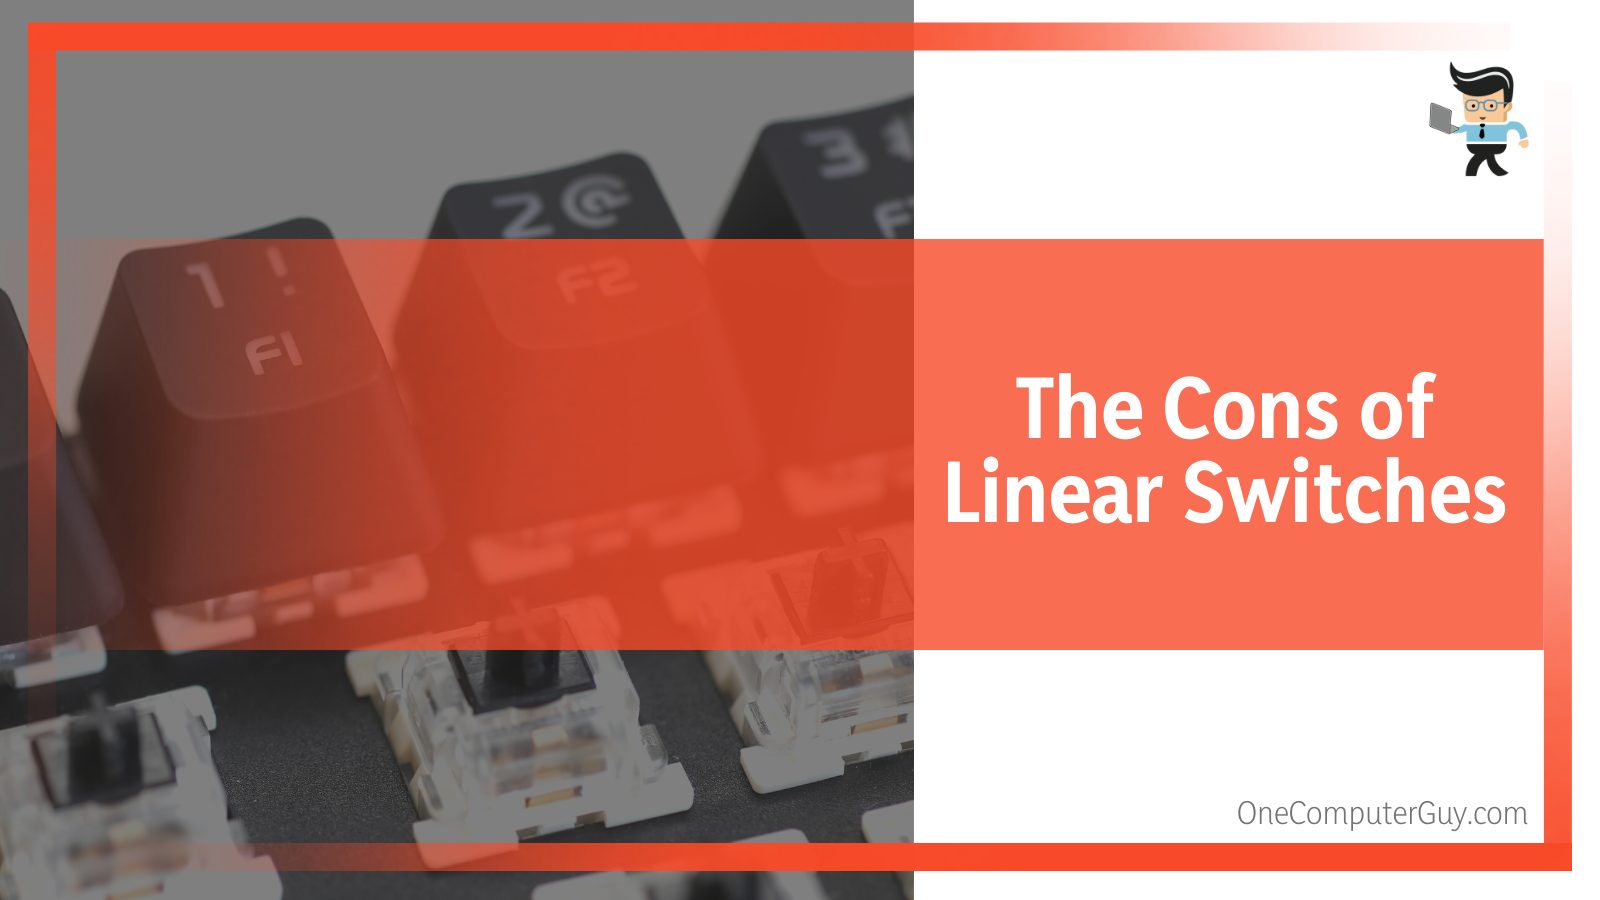 The Cons of Linear Switches